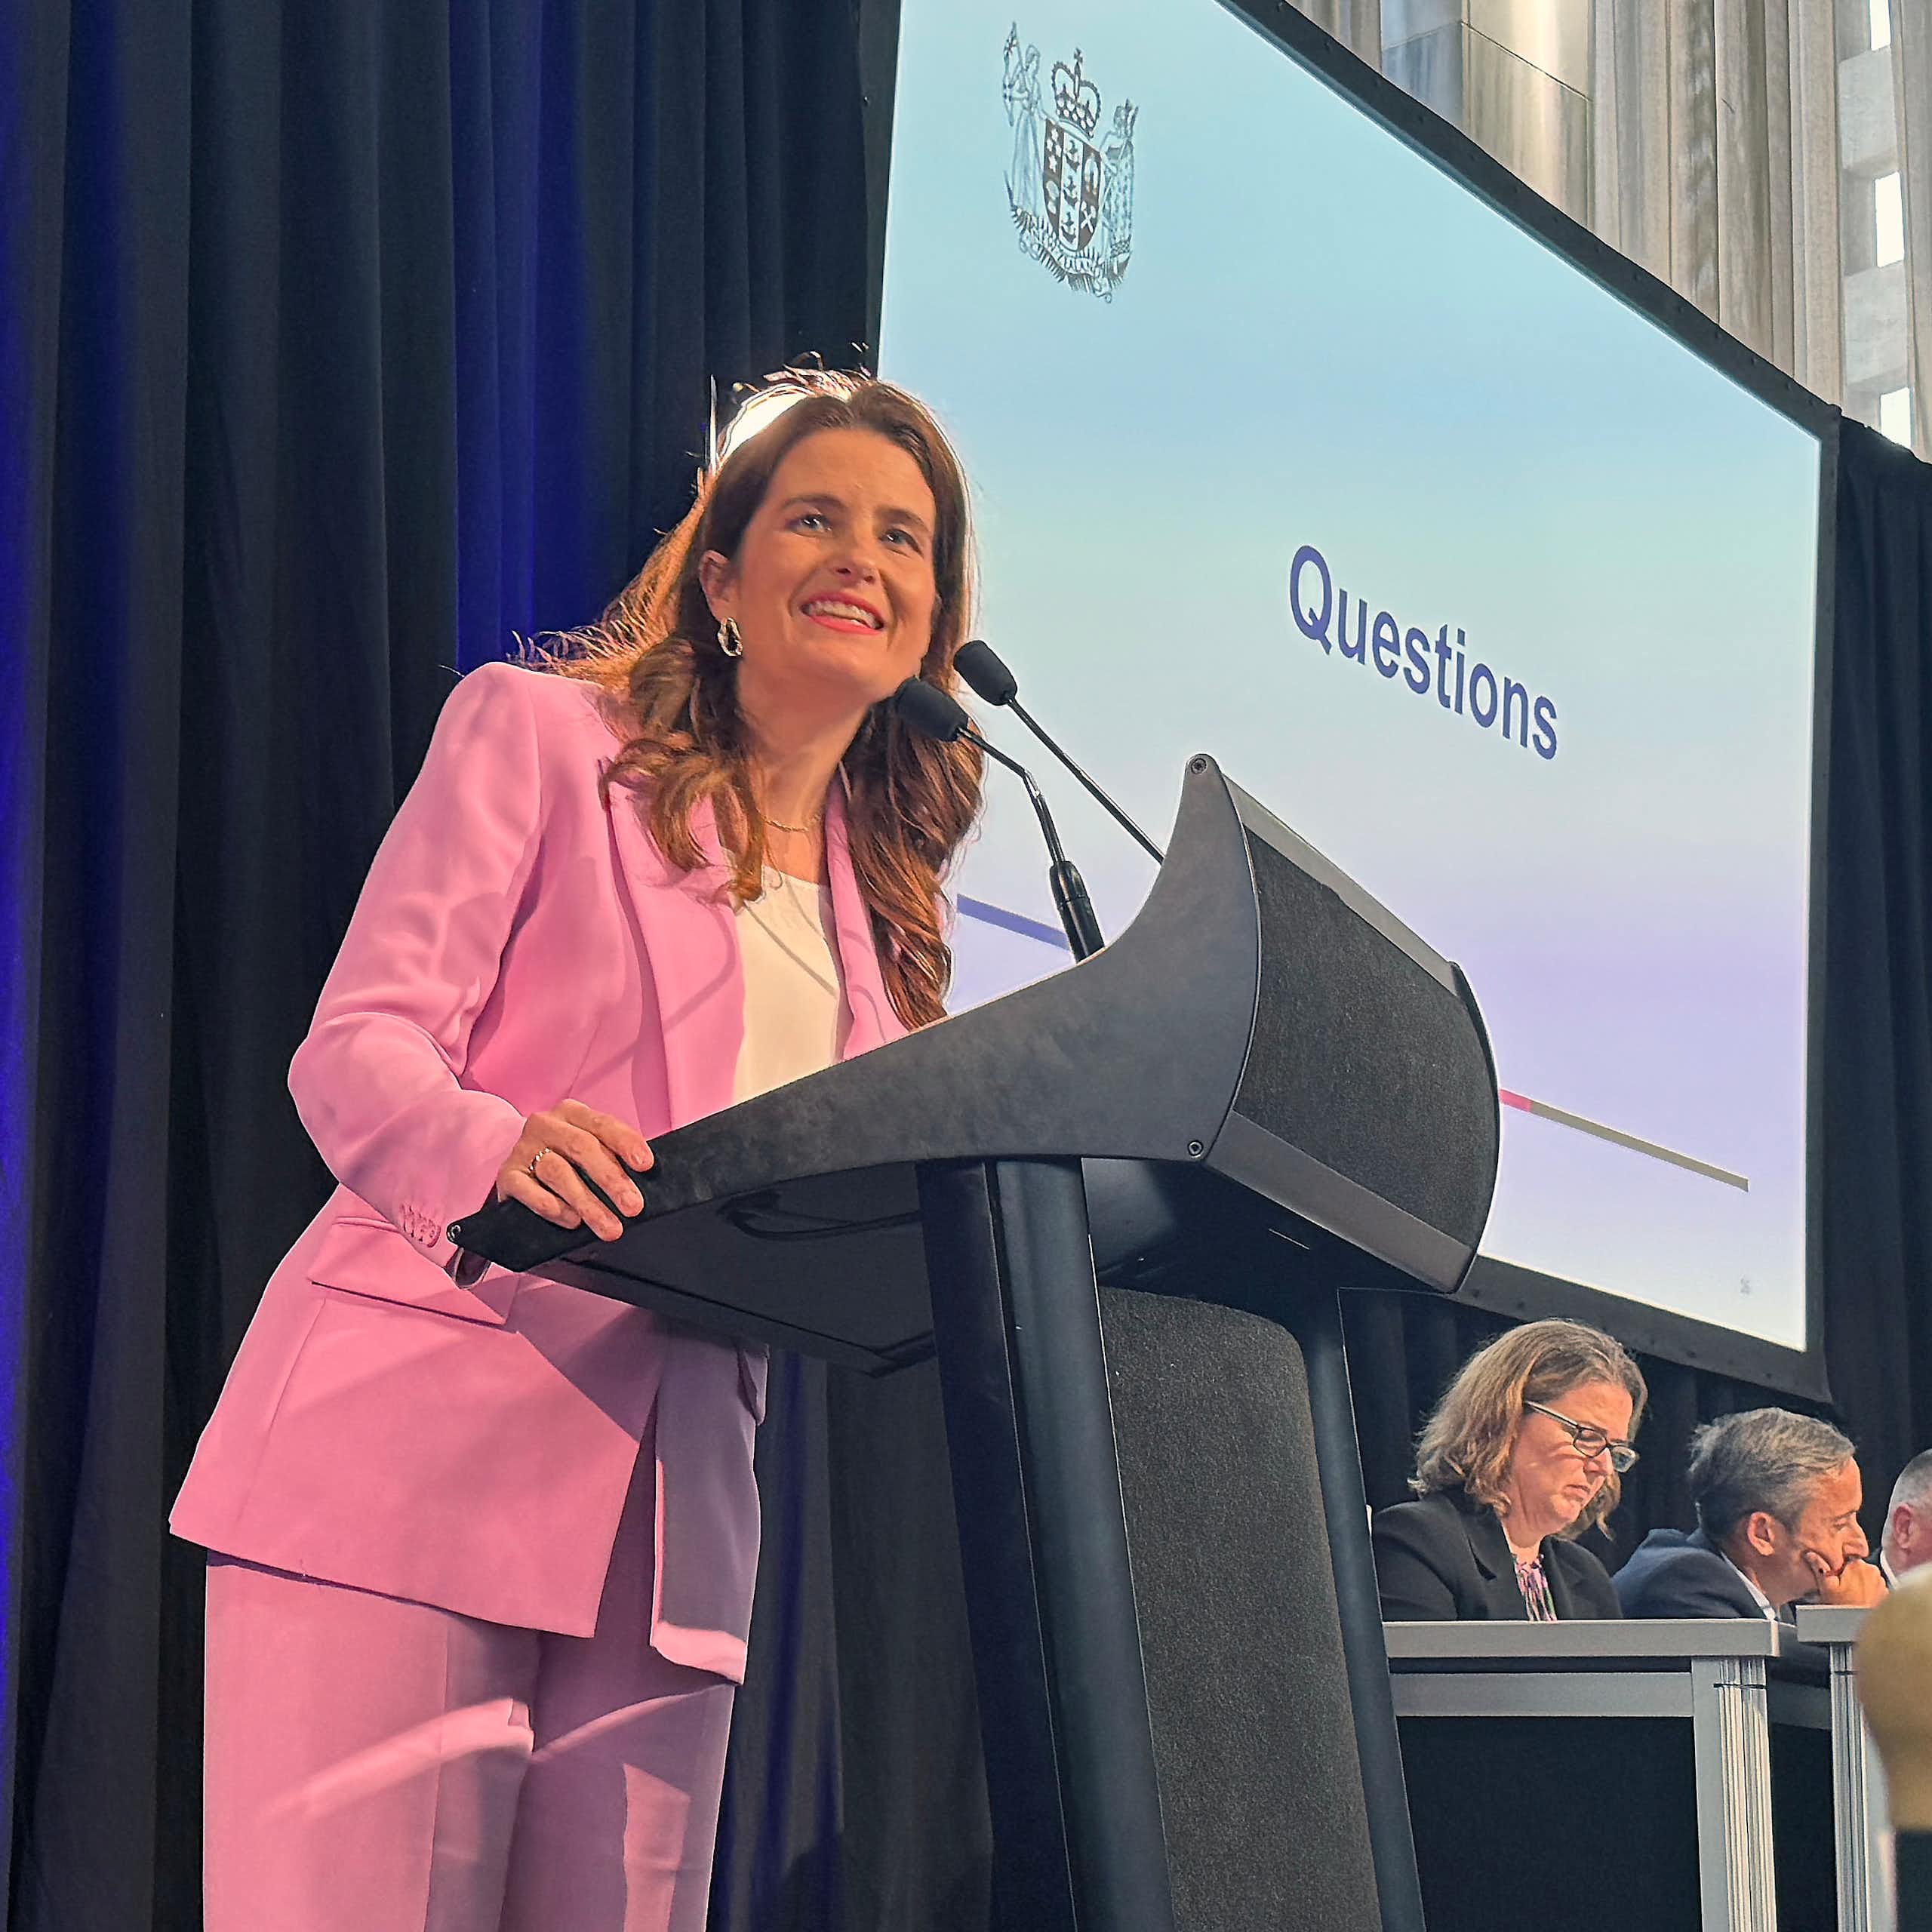 Woman in pink suit stands at lectern